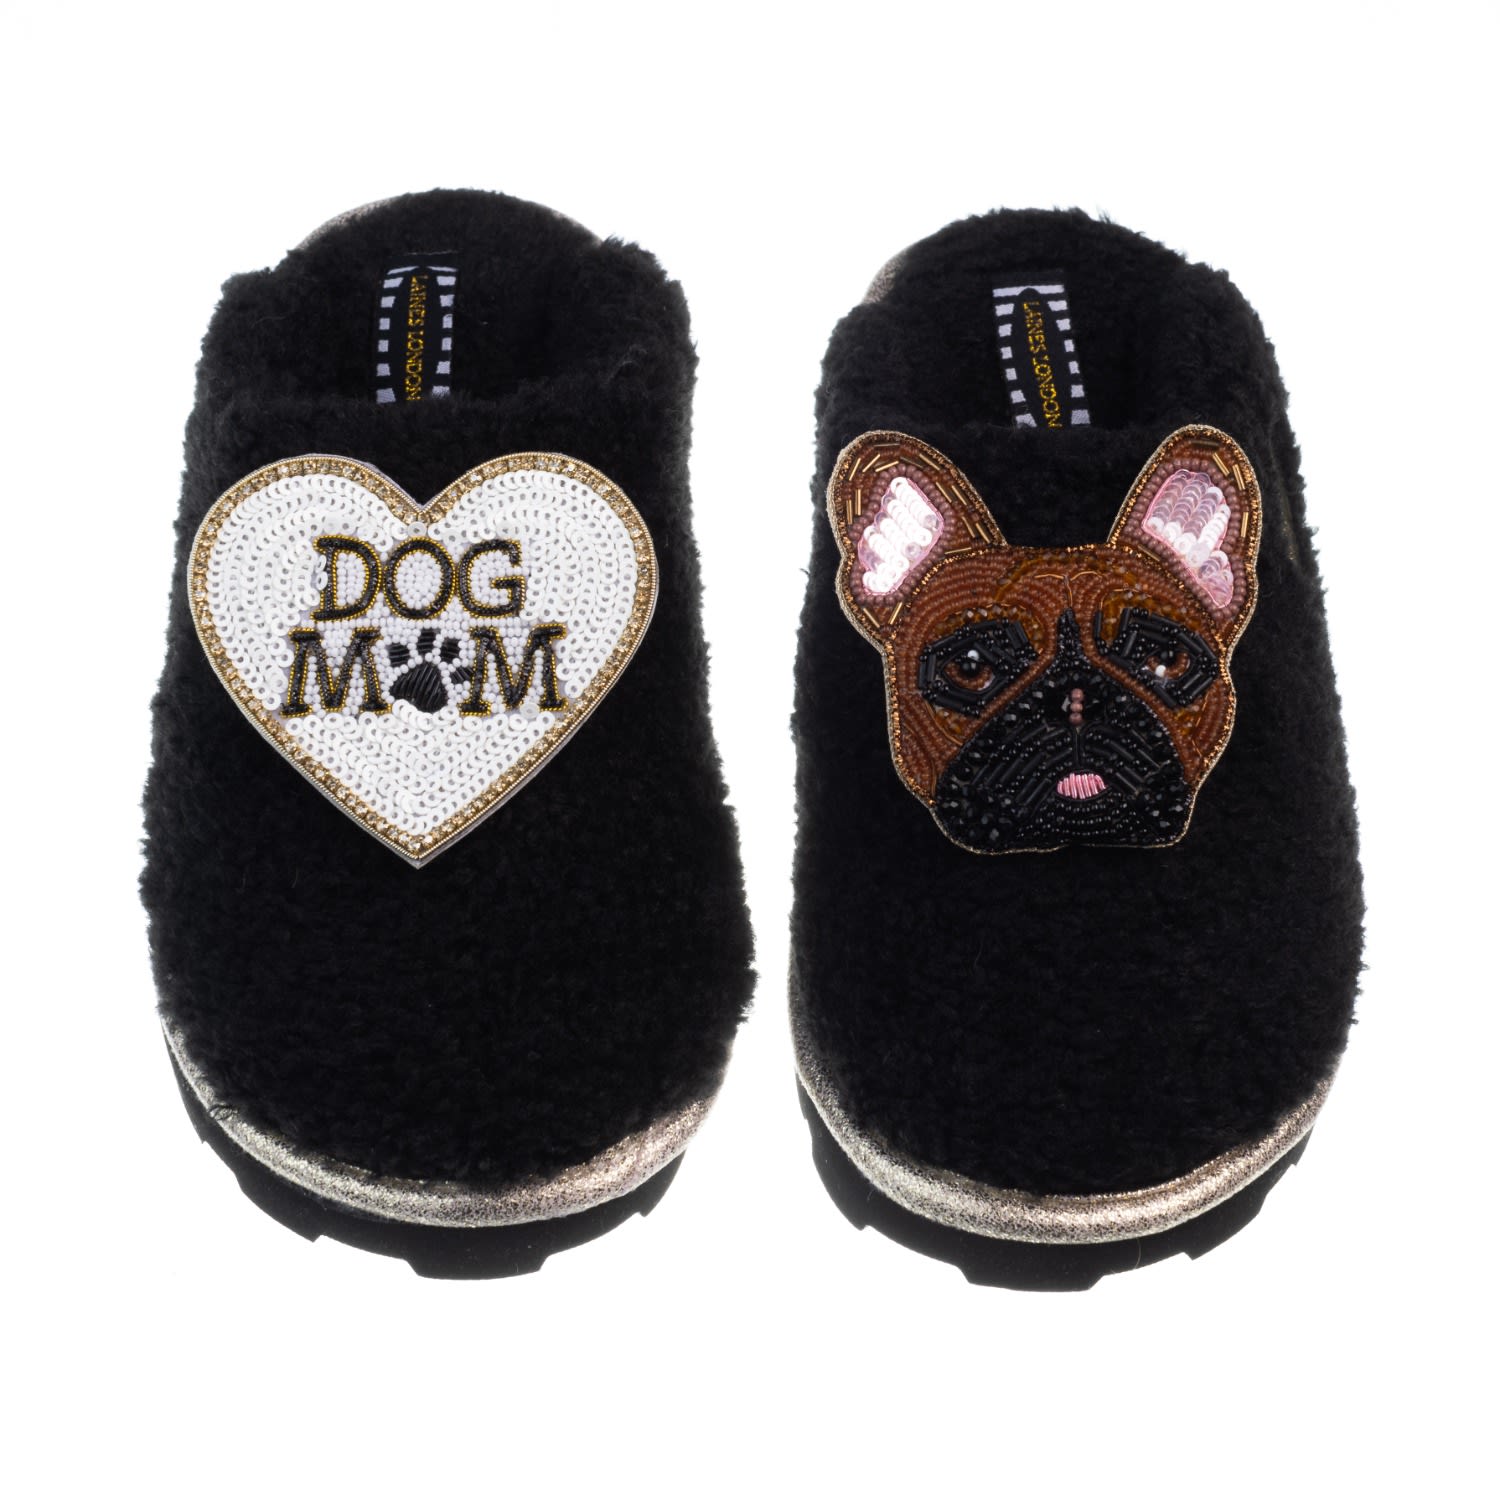 Women’s Teddy Closed Toe Slippers With Cookie The Frenchie & Dog Mum / Mom Brooches - Black Small Laines London